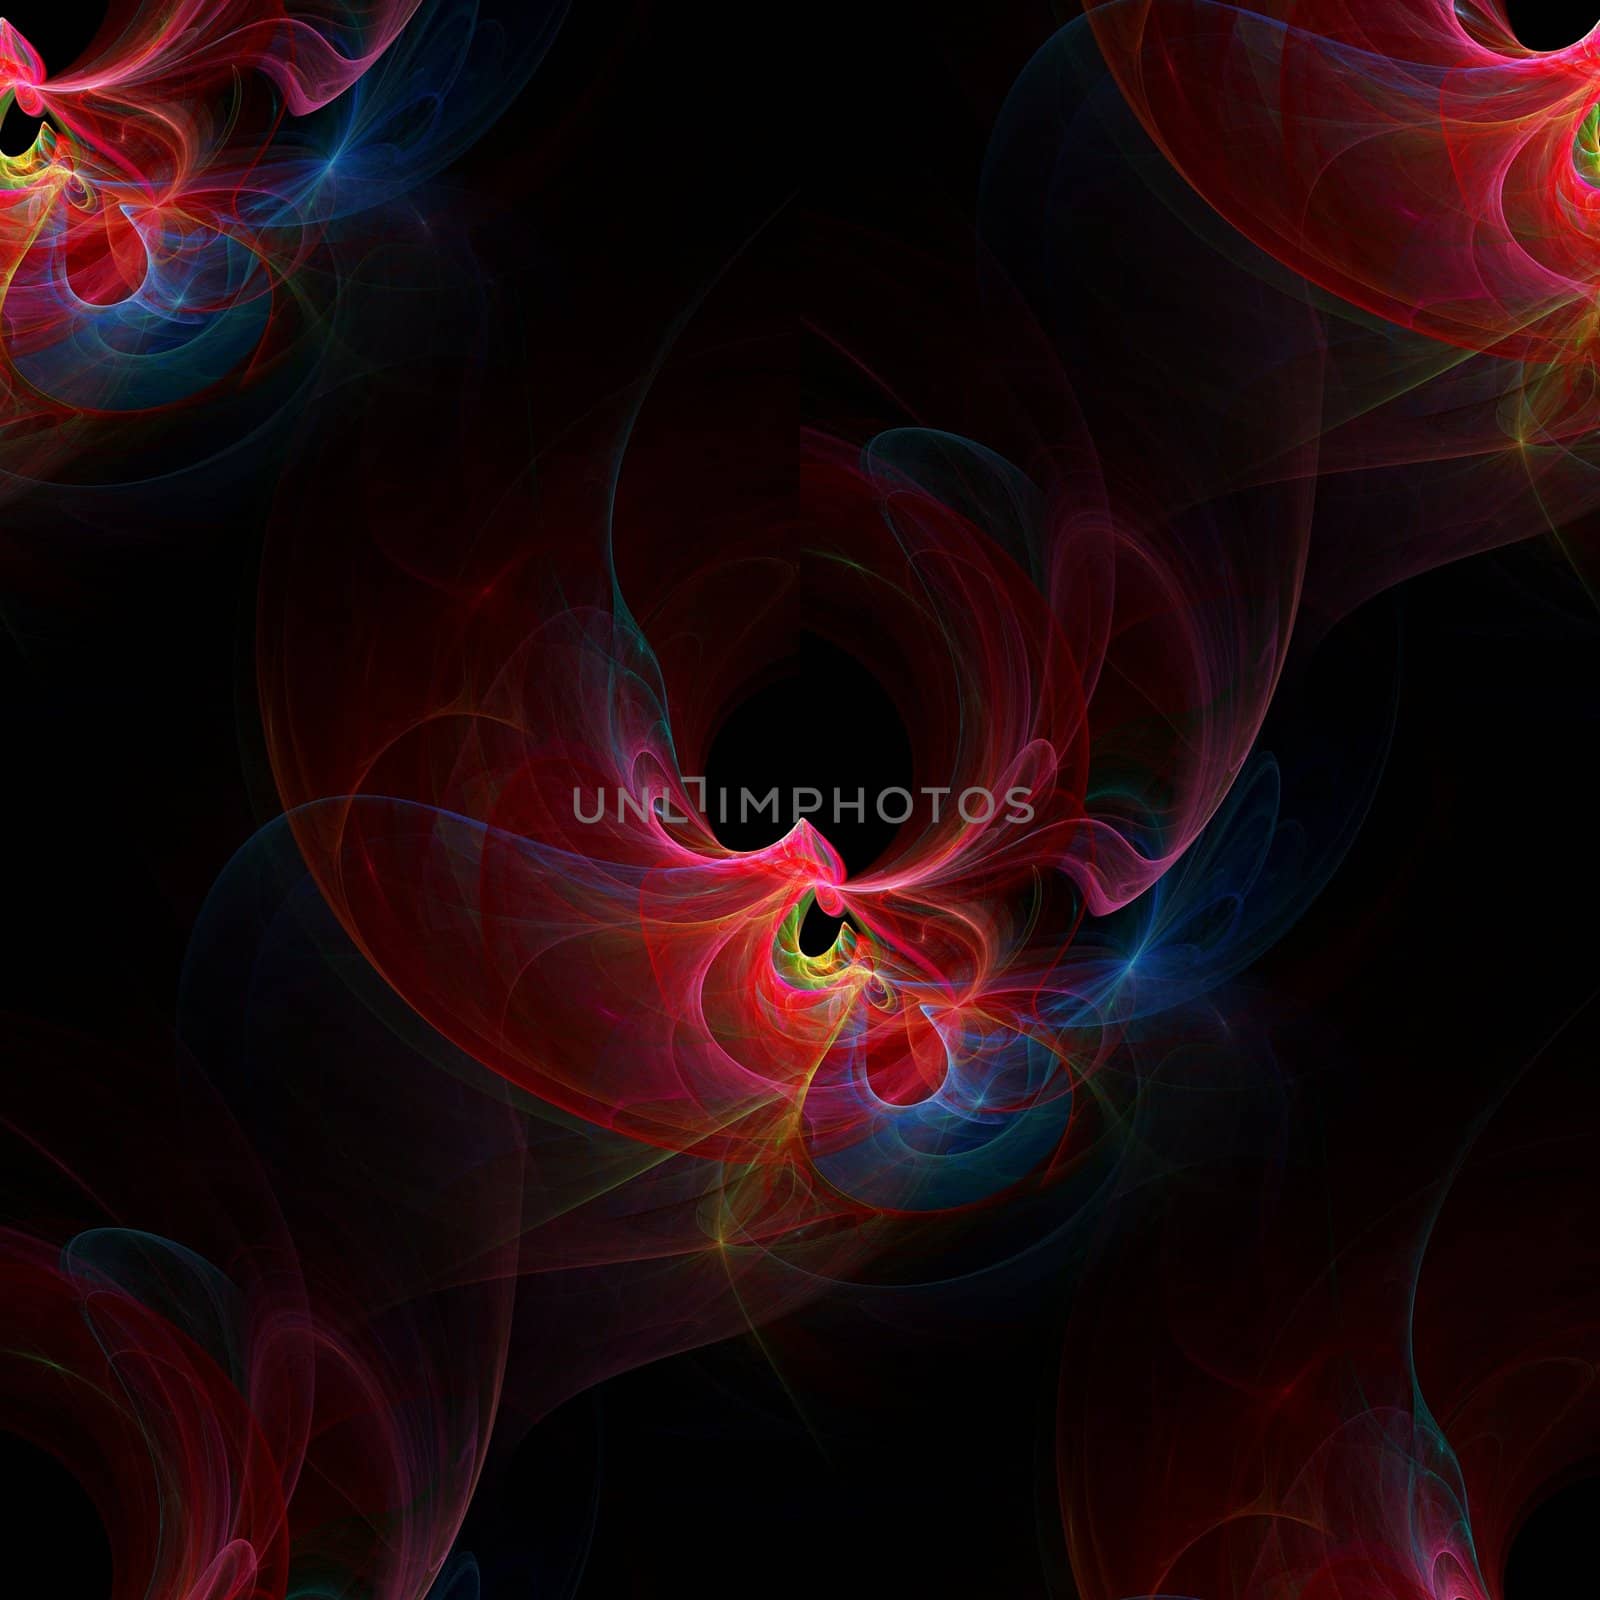 Abstract fractal abstract background with a seamless repeat pattern